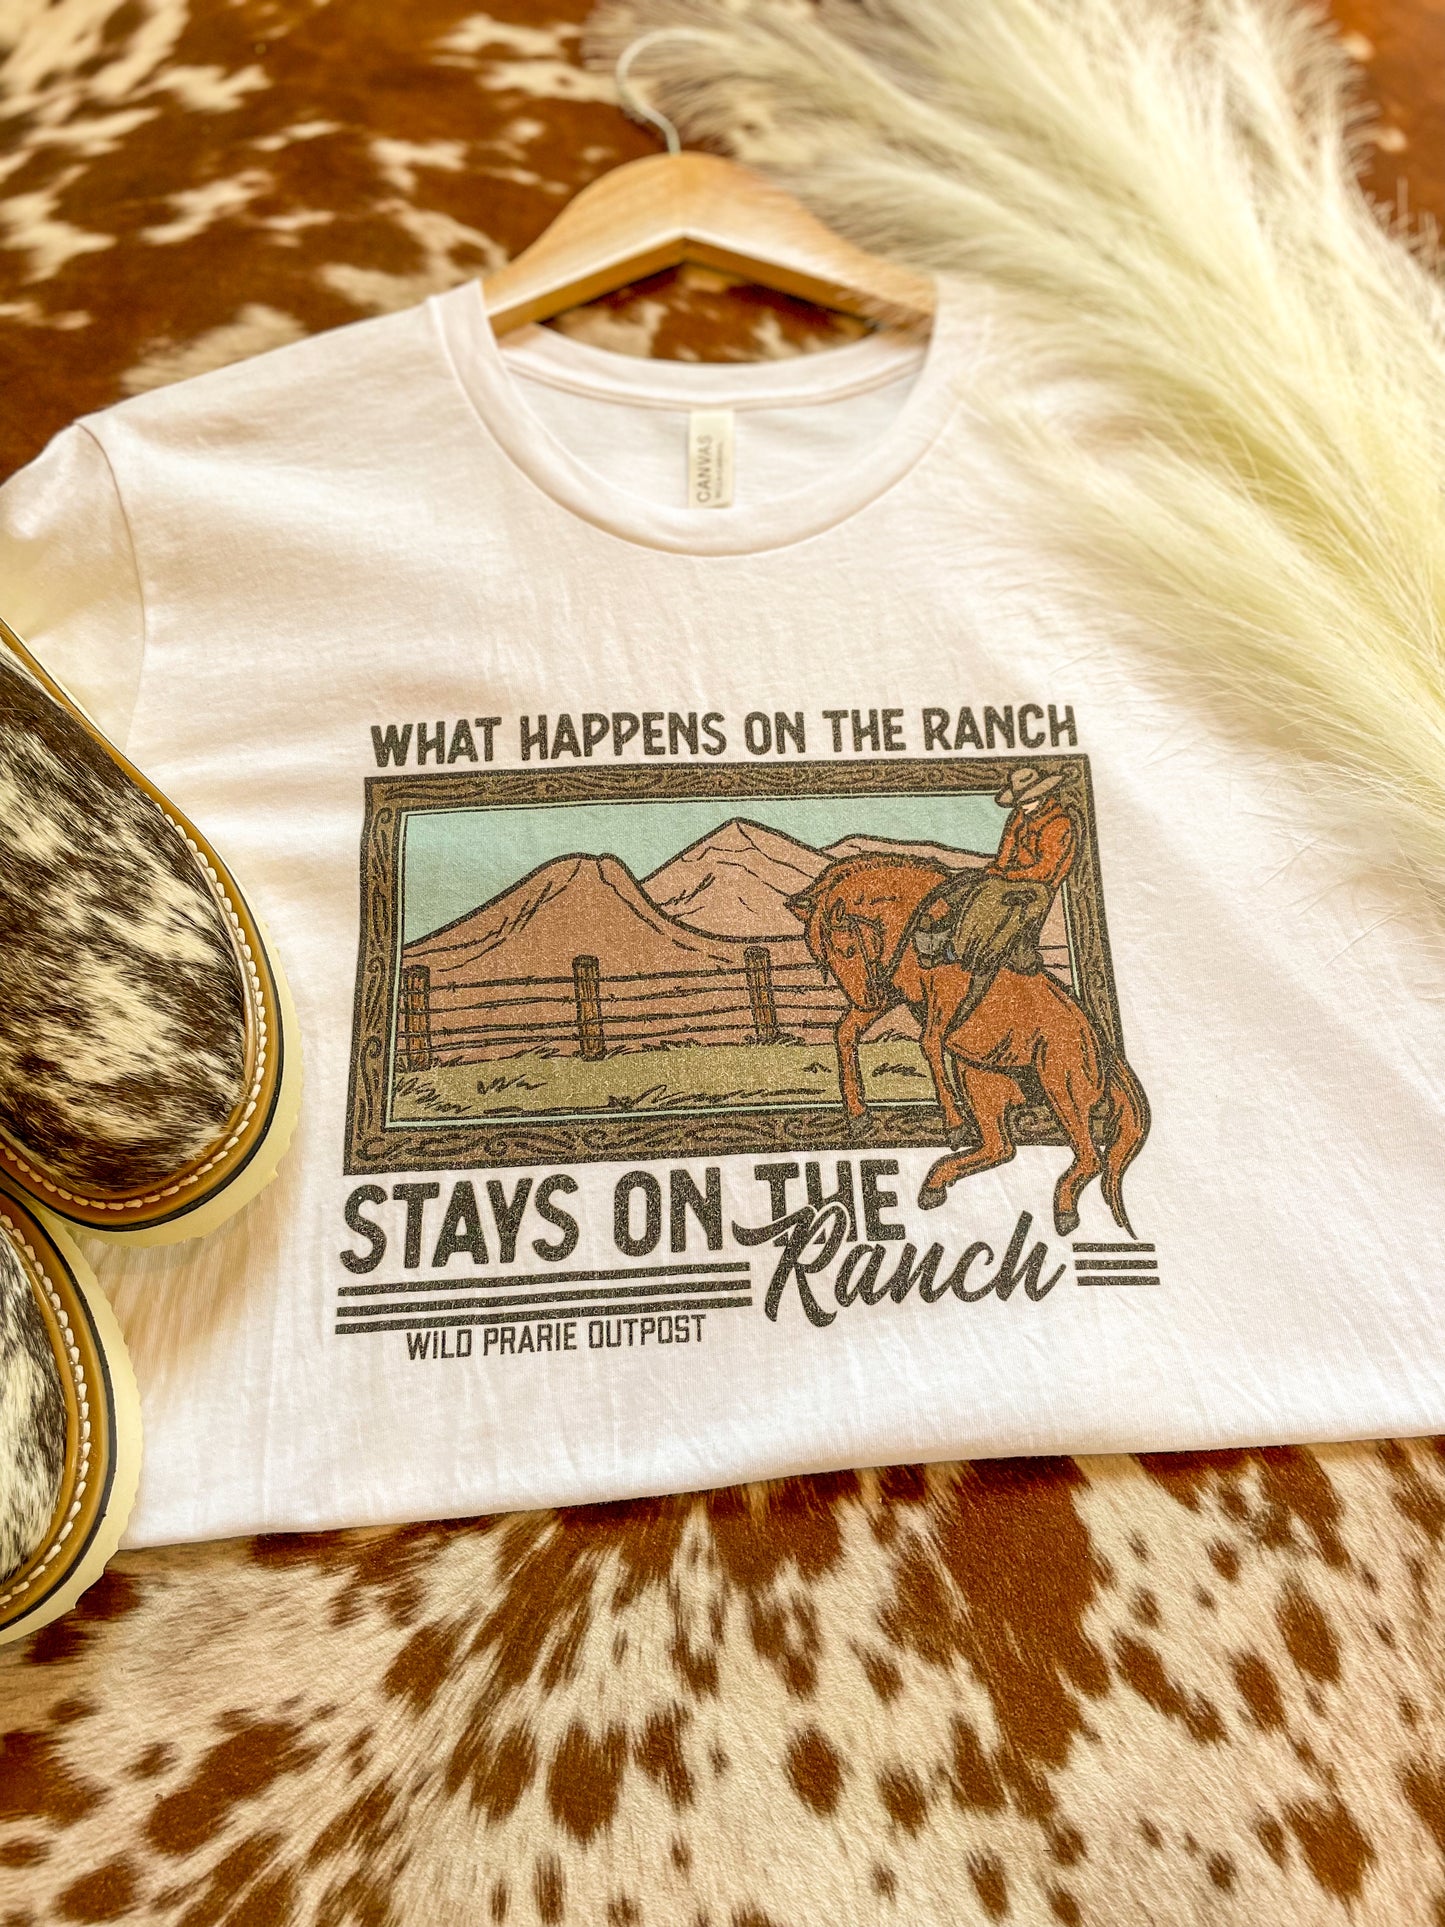 What Happens on the Ranch stays on the Ranch